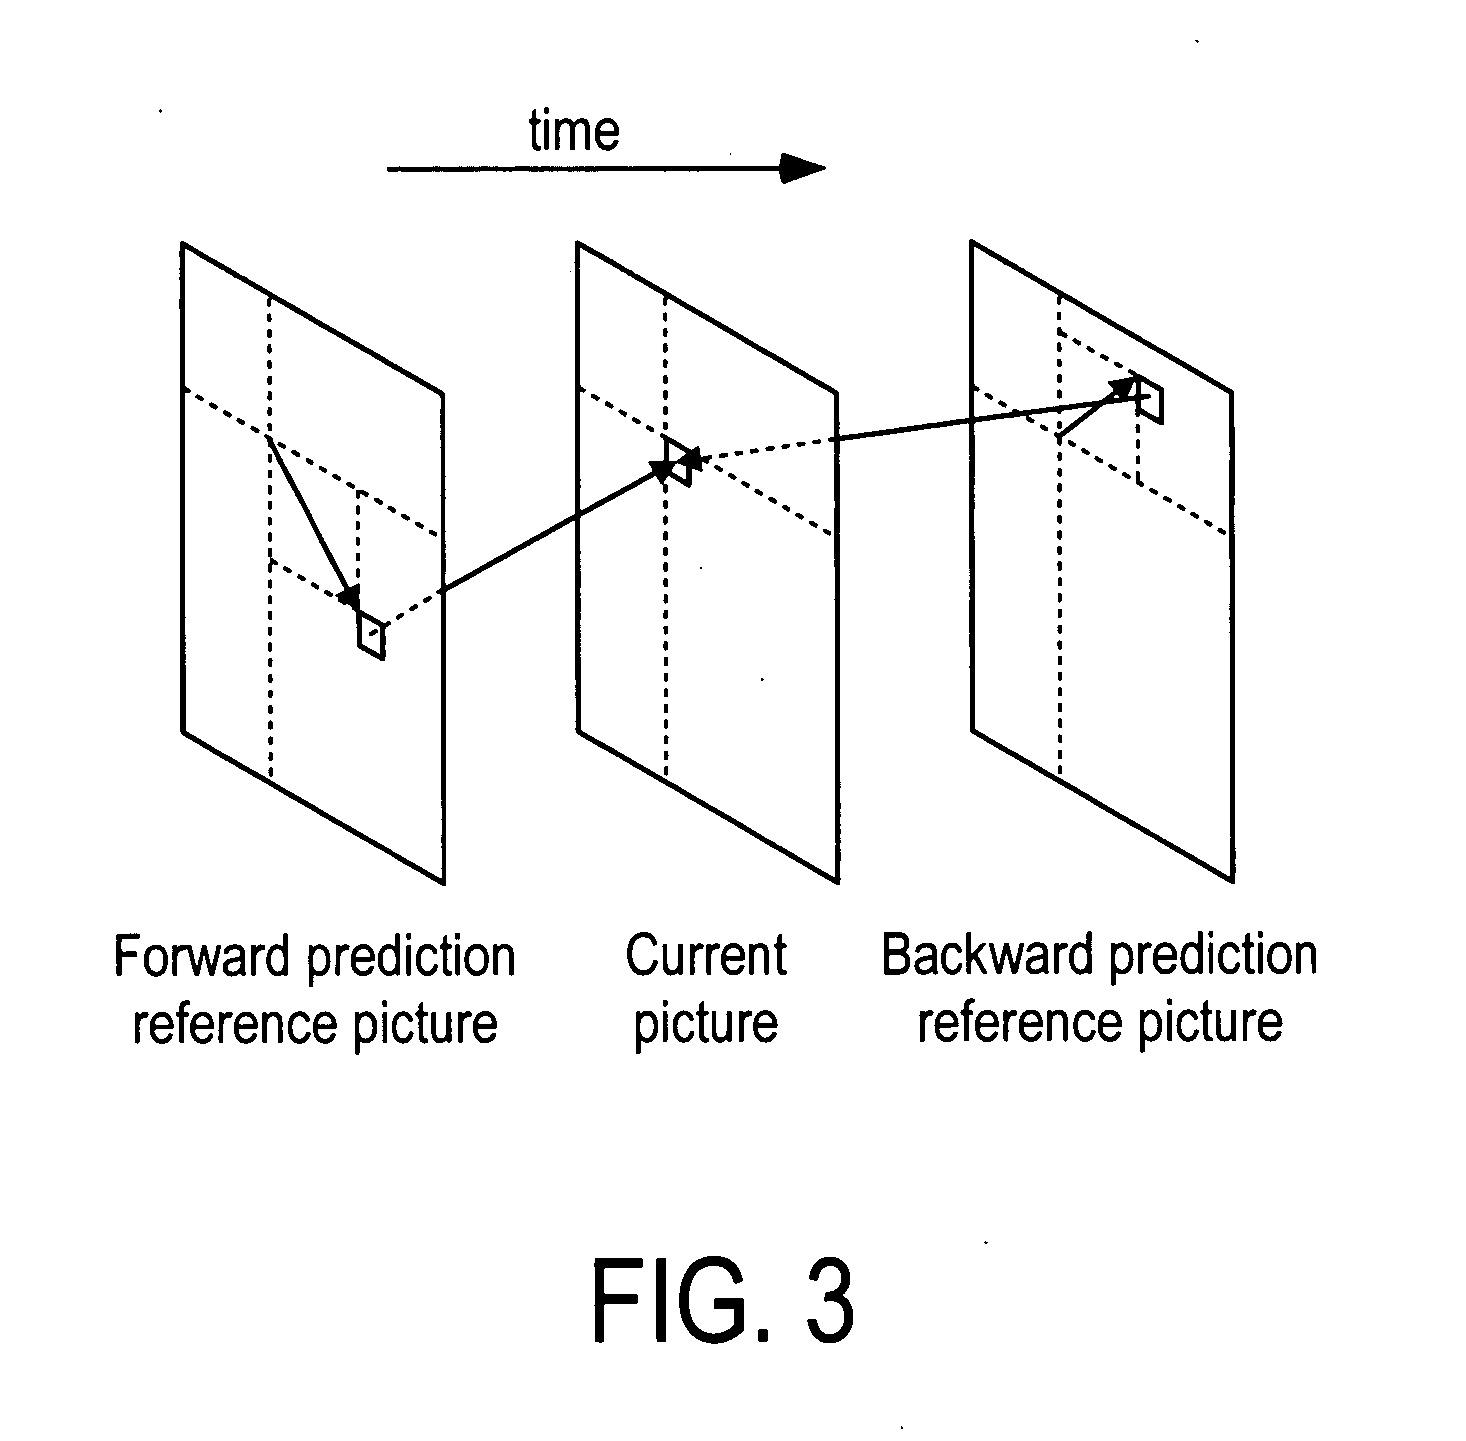 System and method for performing optimized quantization via quantization re-scaling